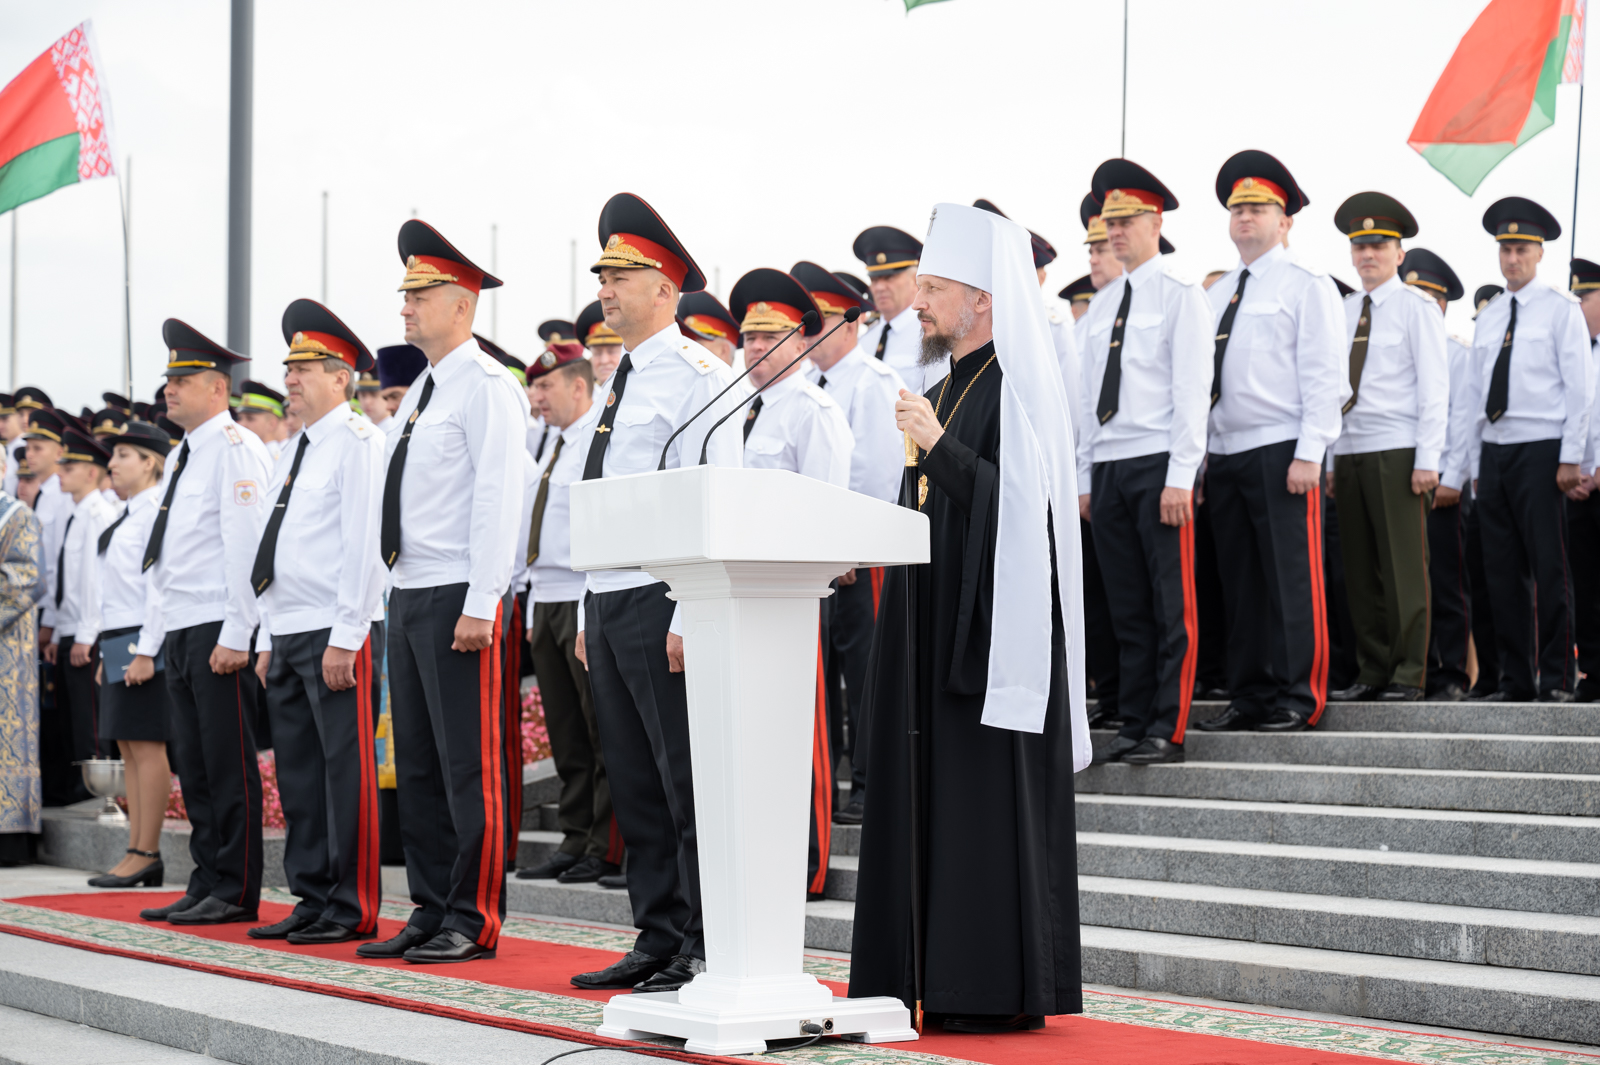 Metropolitan Benjamin of Belarus Took Part in Oath Ceremony for Cadets of the Academy of the Ministry of Internal Affairs and the Mogilev Institute of the Ministry of Internal Affairs